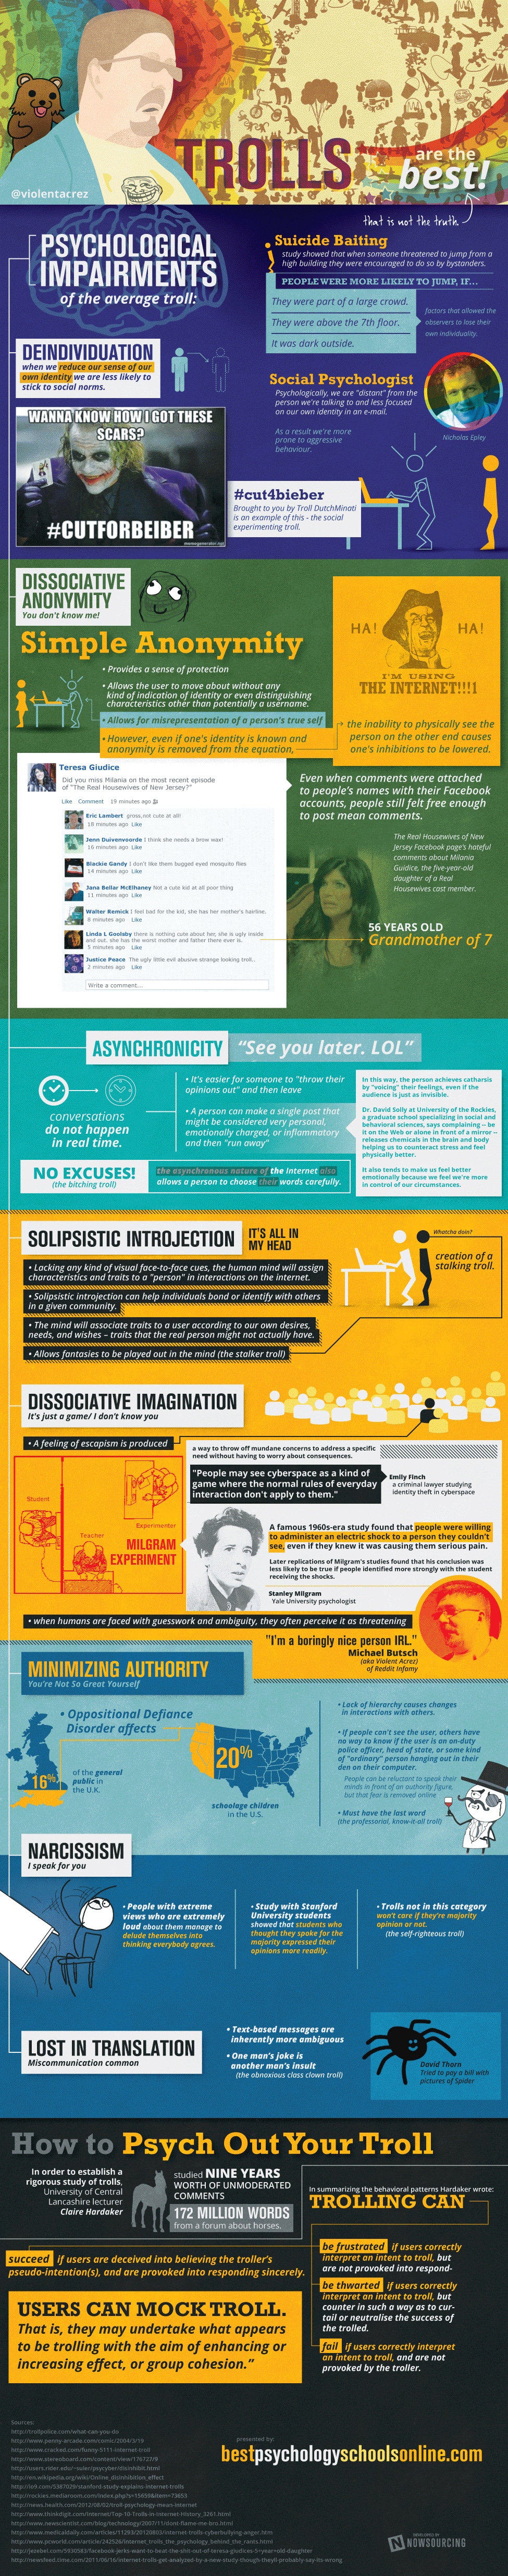 The Psychology Behind An Internet Troll [Infographic]